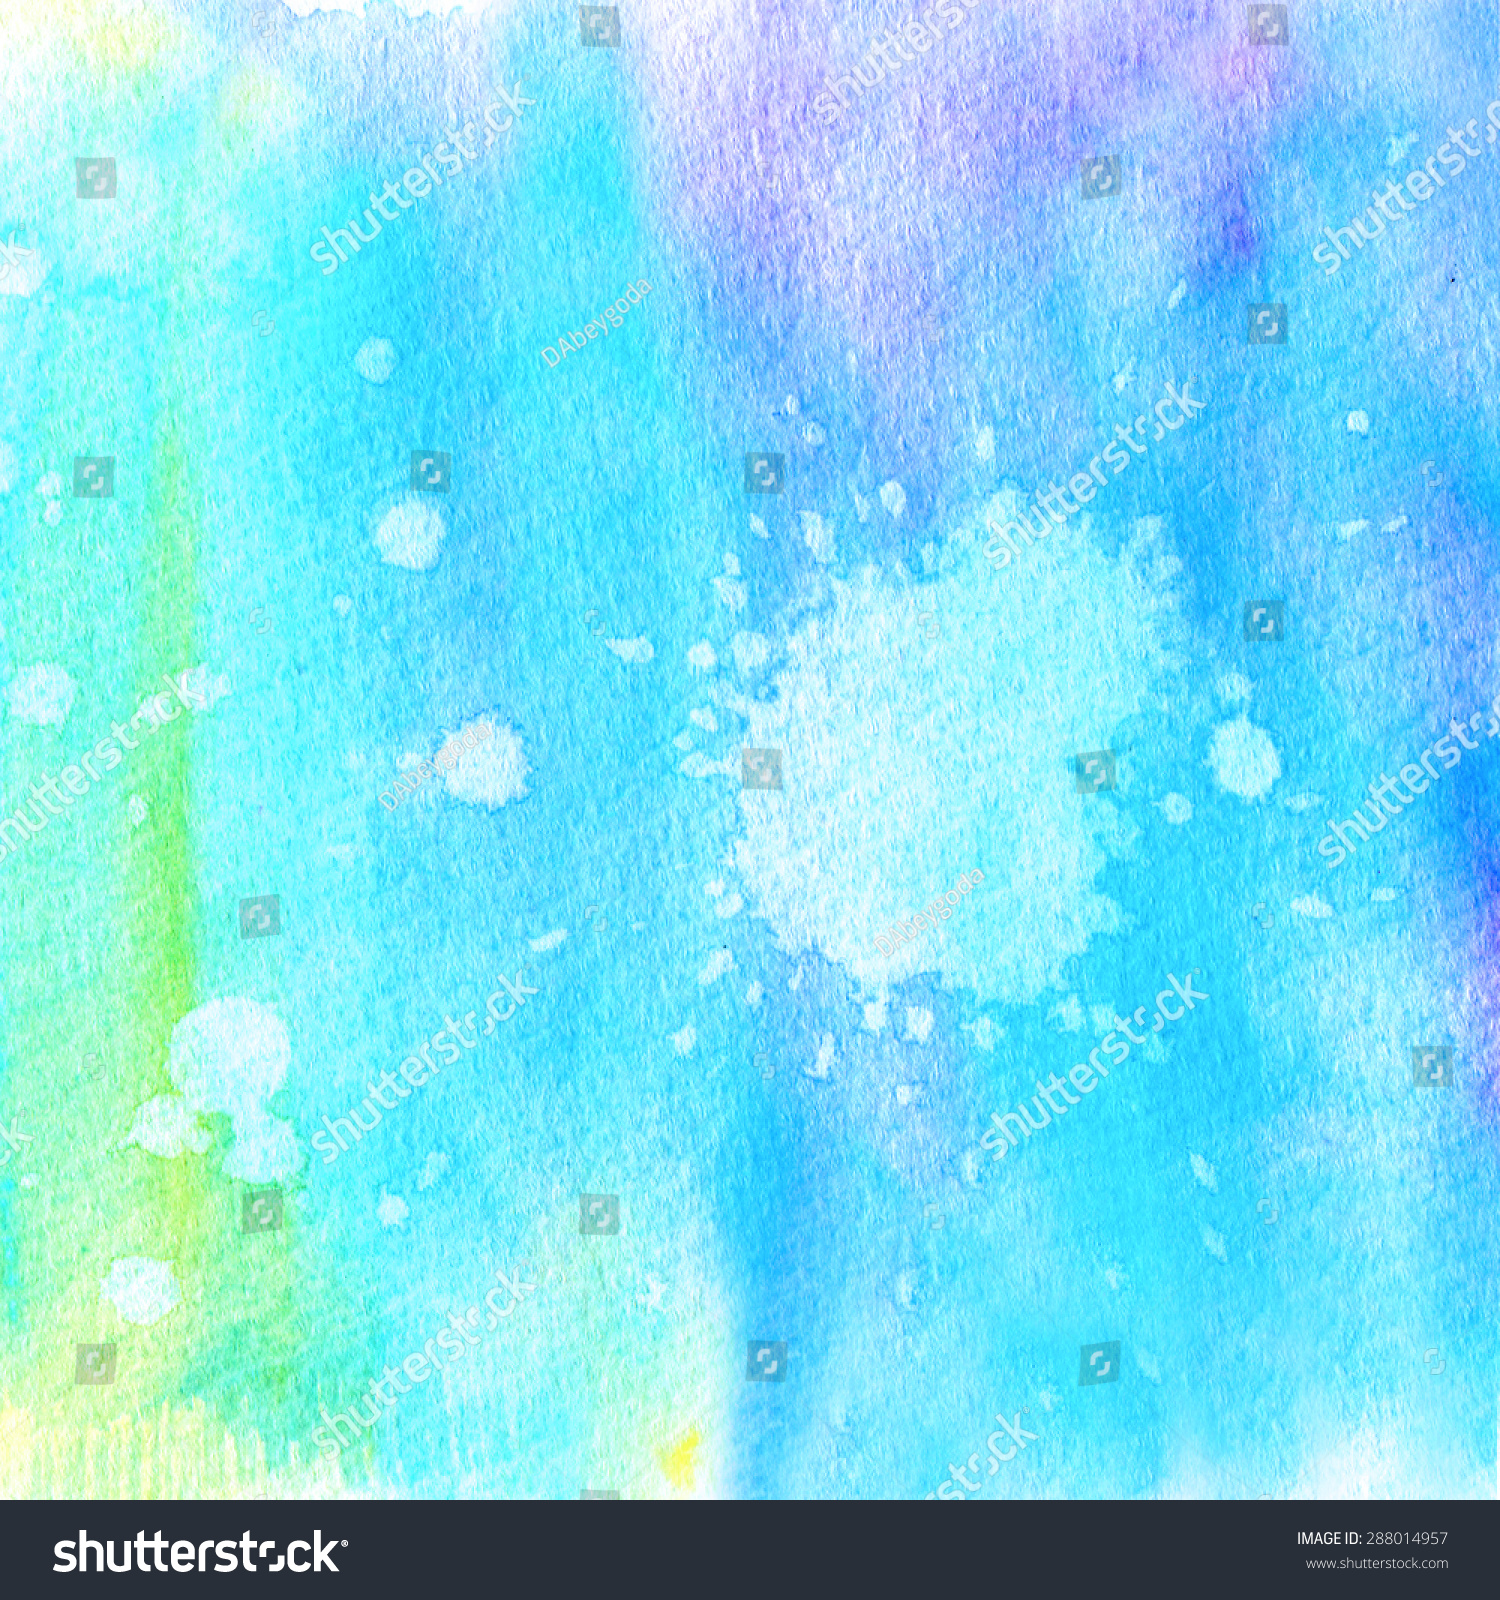 Watercolor Ink Texture Abstract Image Bokeh Stock Illustration ...